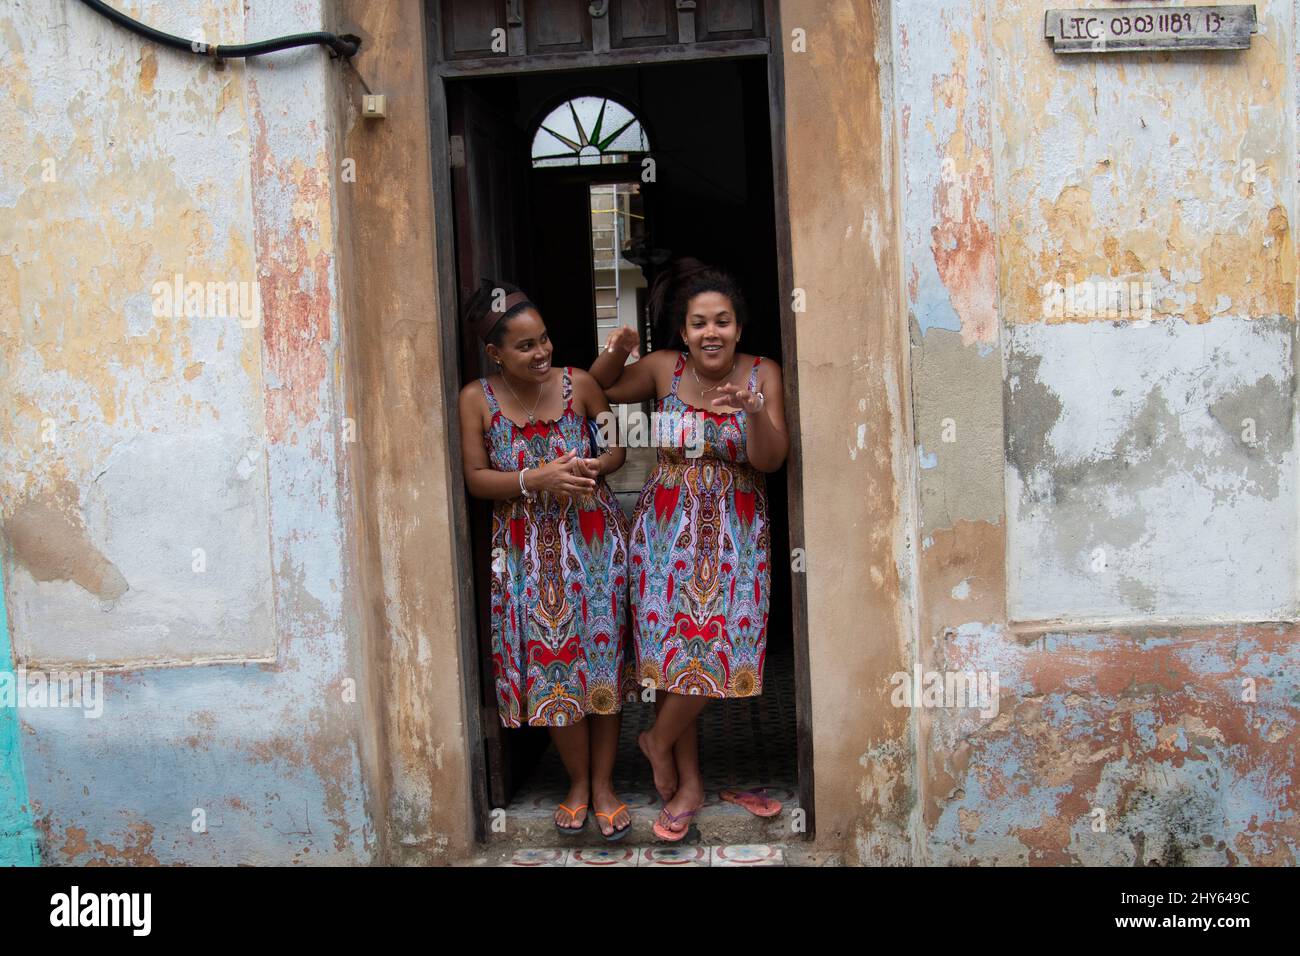 Two young Cuban female women dressed alike laugh in the doorway of their home in Havana, Cuba. Stock Photo